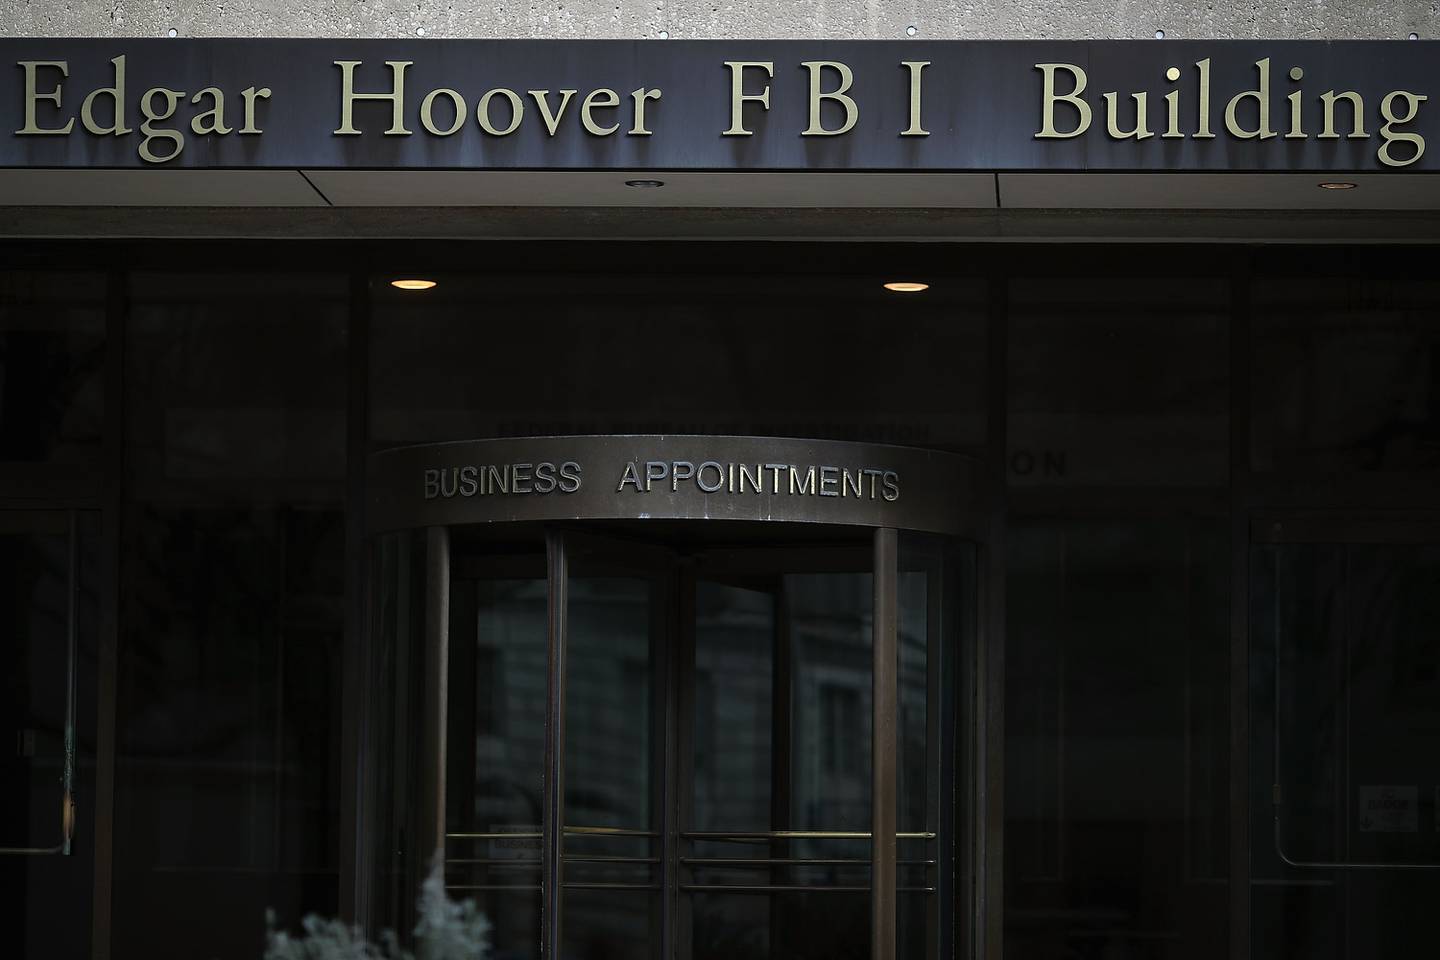 An entranceway to a building includes a revolving door. Above the door are letters that spell out business appointments. On the facade above, letters spell out Edgar Hoover FBI Building.